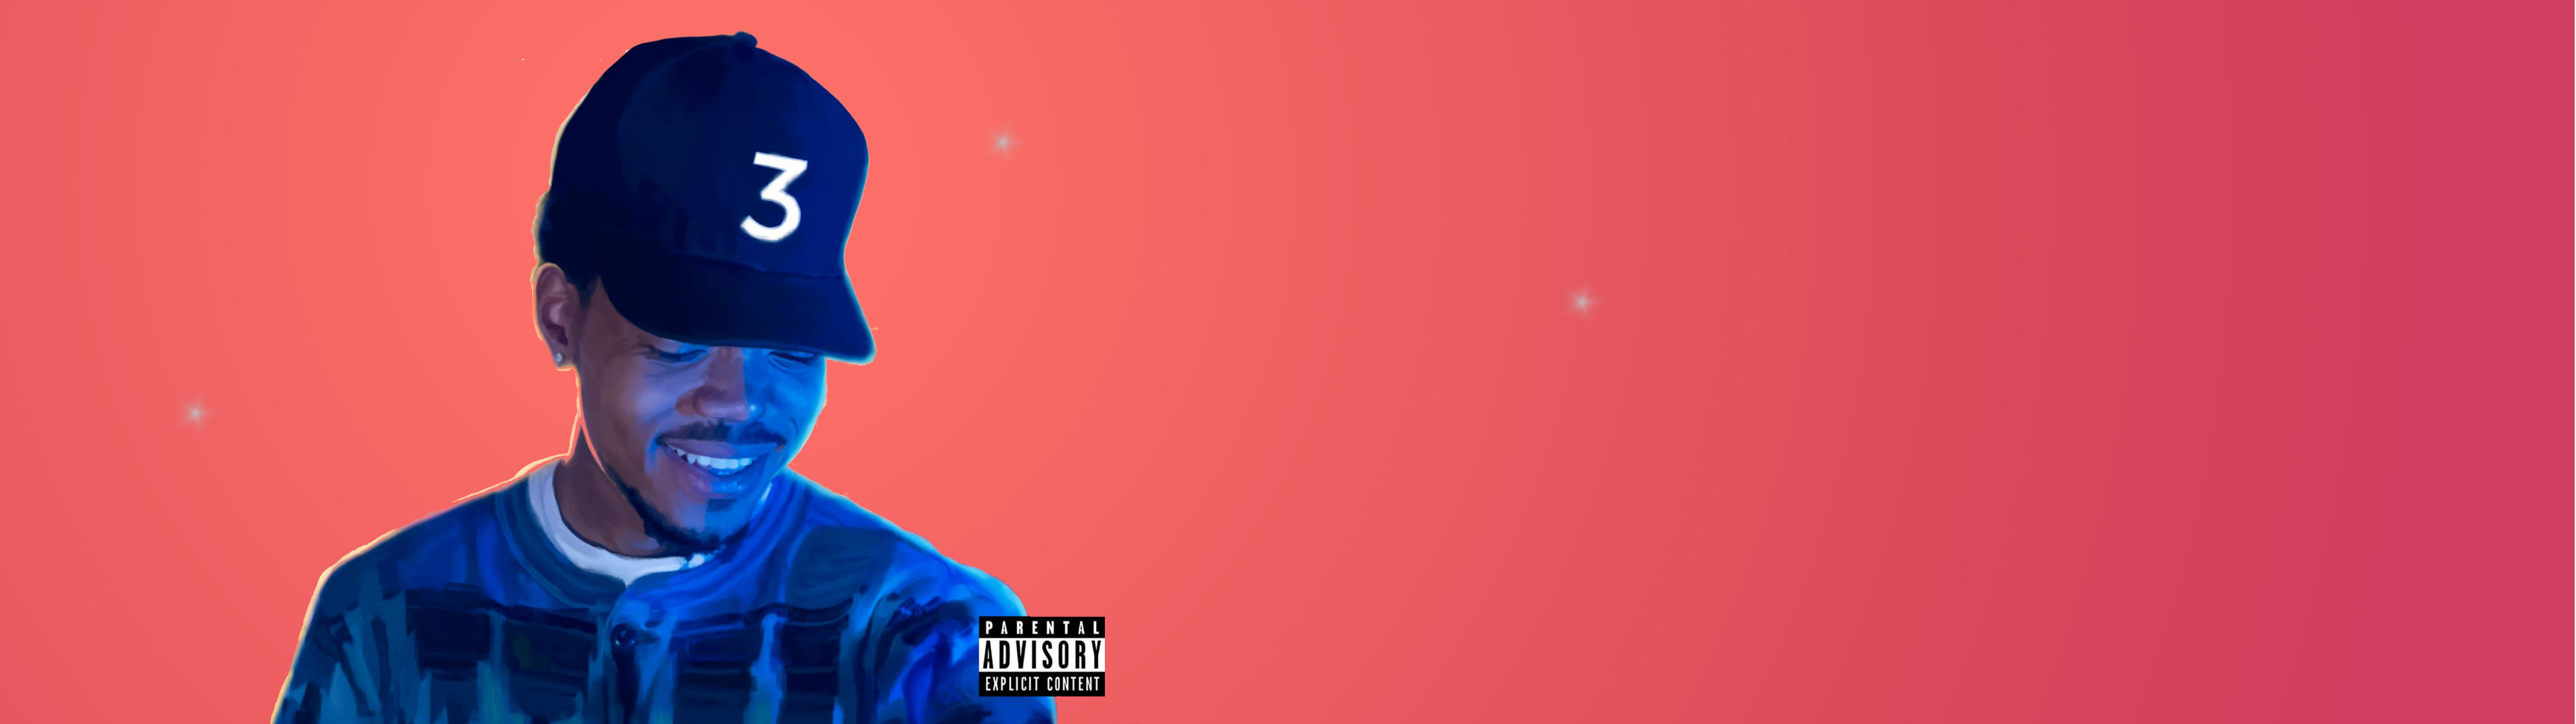 Chance The Rapper Coloring Book Wallpaper
 [3840x1080] Coloring Book by Chance the Rapper multiwall